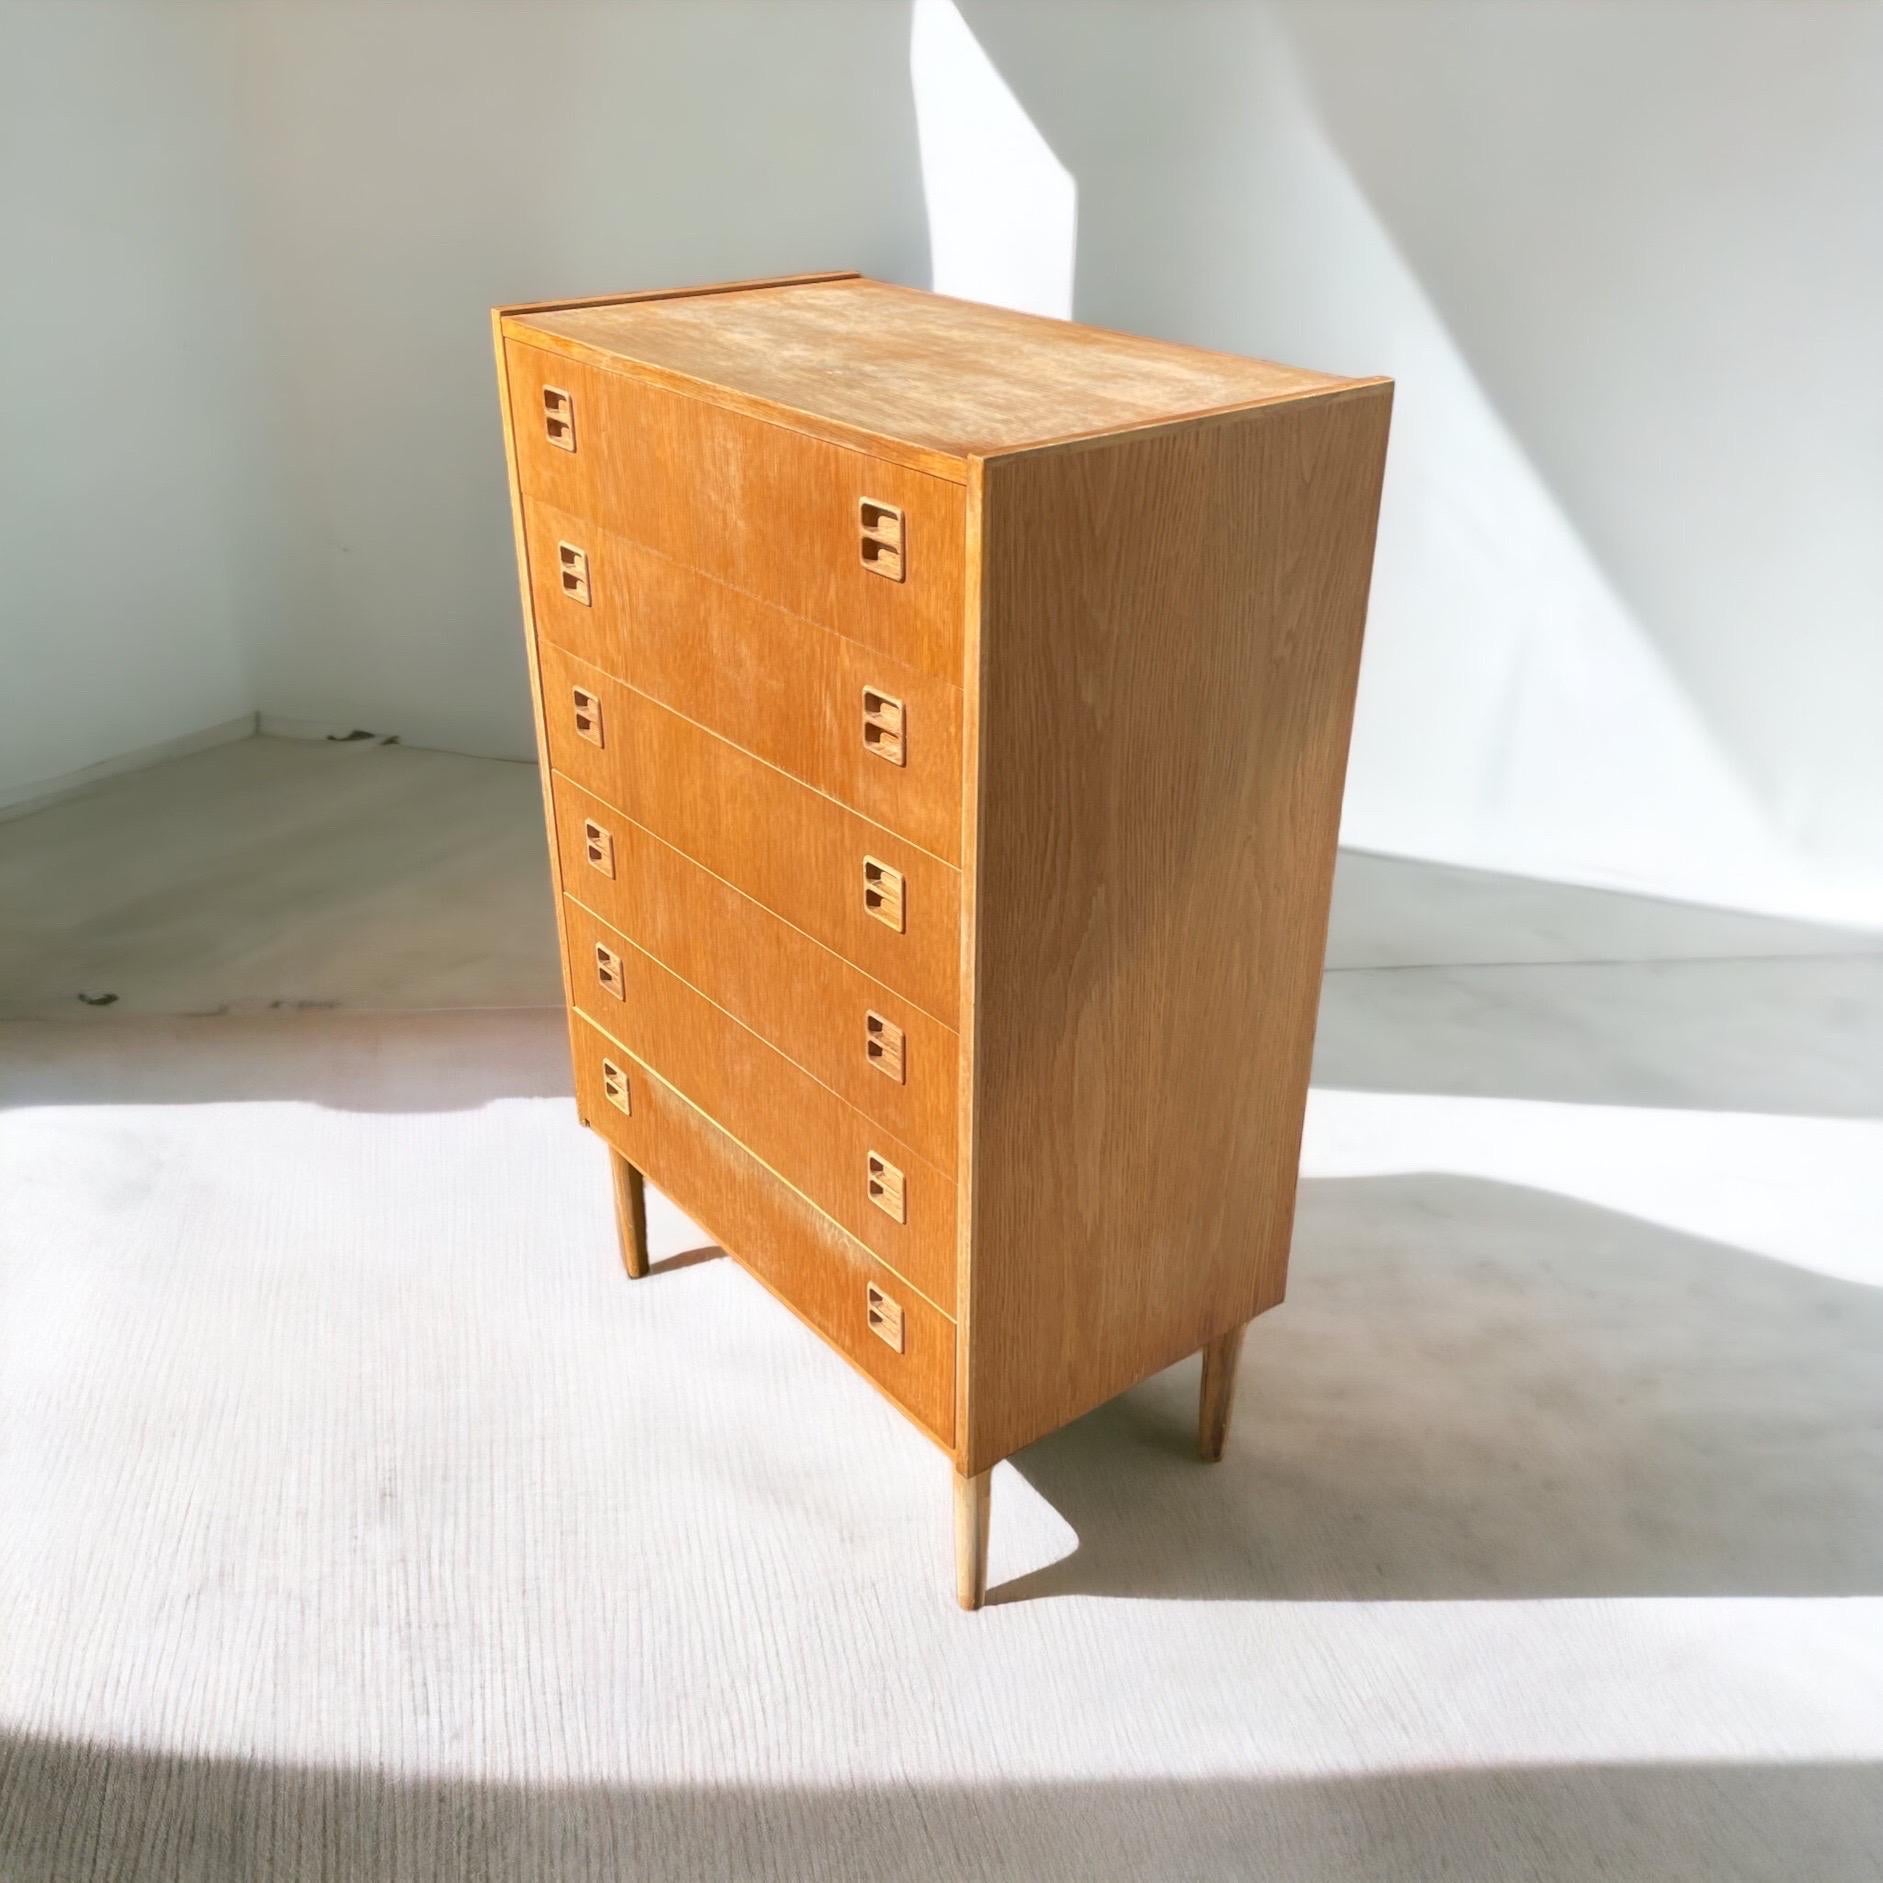 Nordic Oak. Scandinavian Highboy Dresser in good vintage condition by Kværndrup Møbelfabrik.

Lots of storage space with six drawers that all run smoothly, only few signs of aging.

H116, W69, D39 cm.